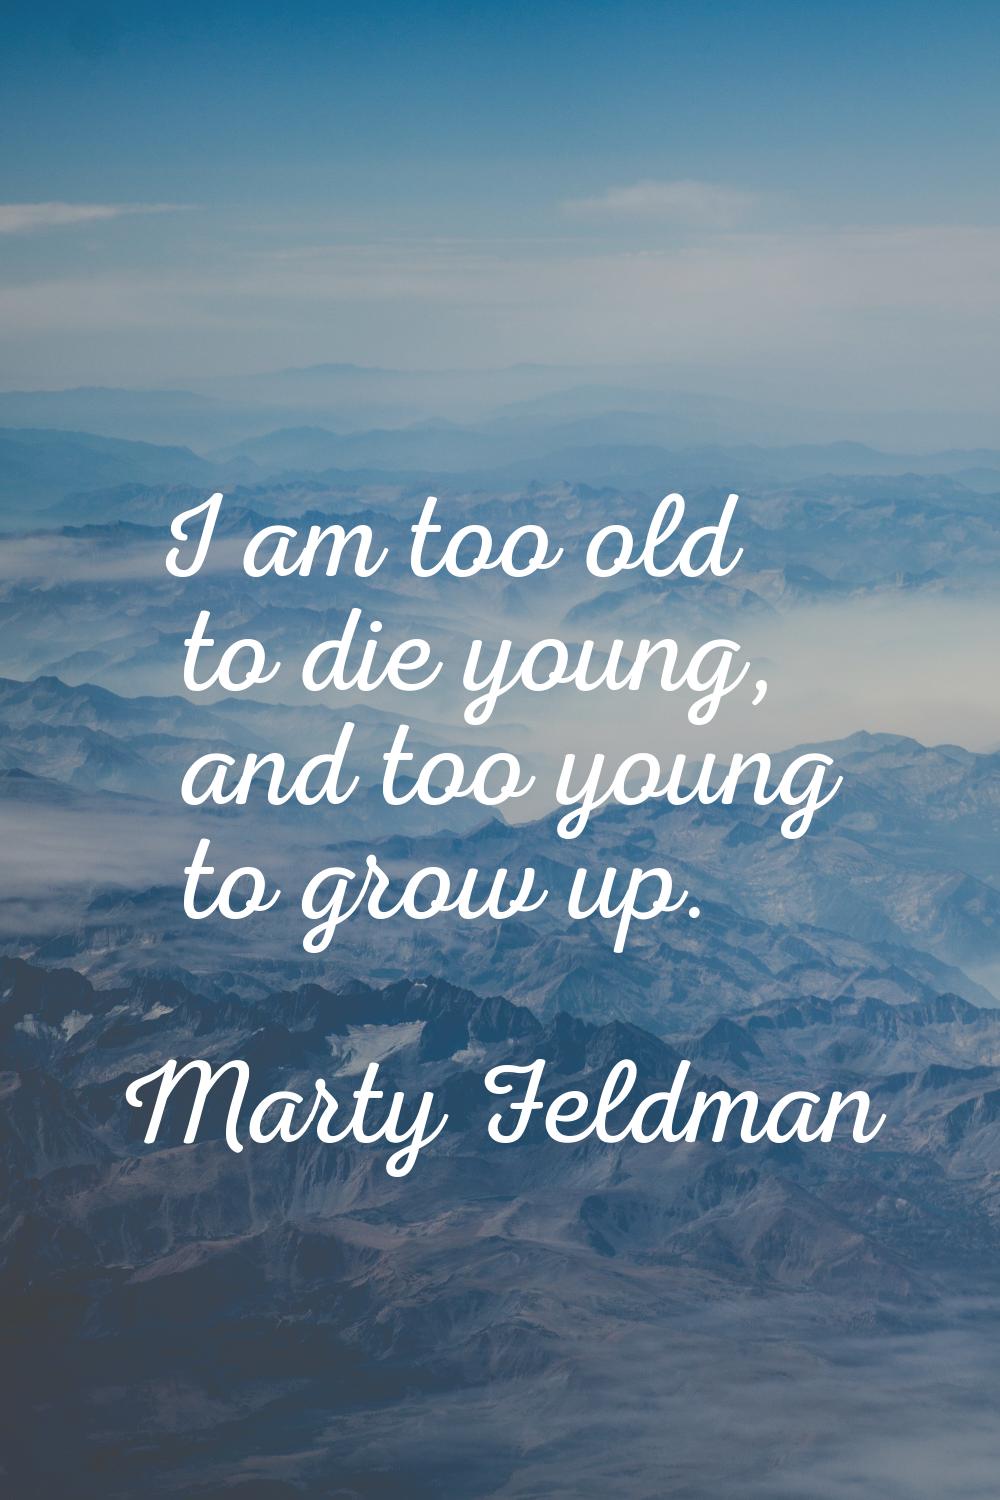 I am too old to die young, and too young to grow up.